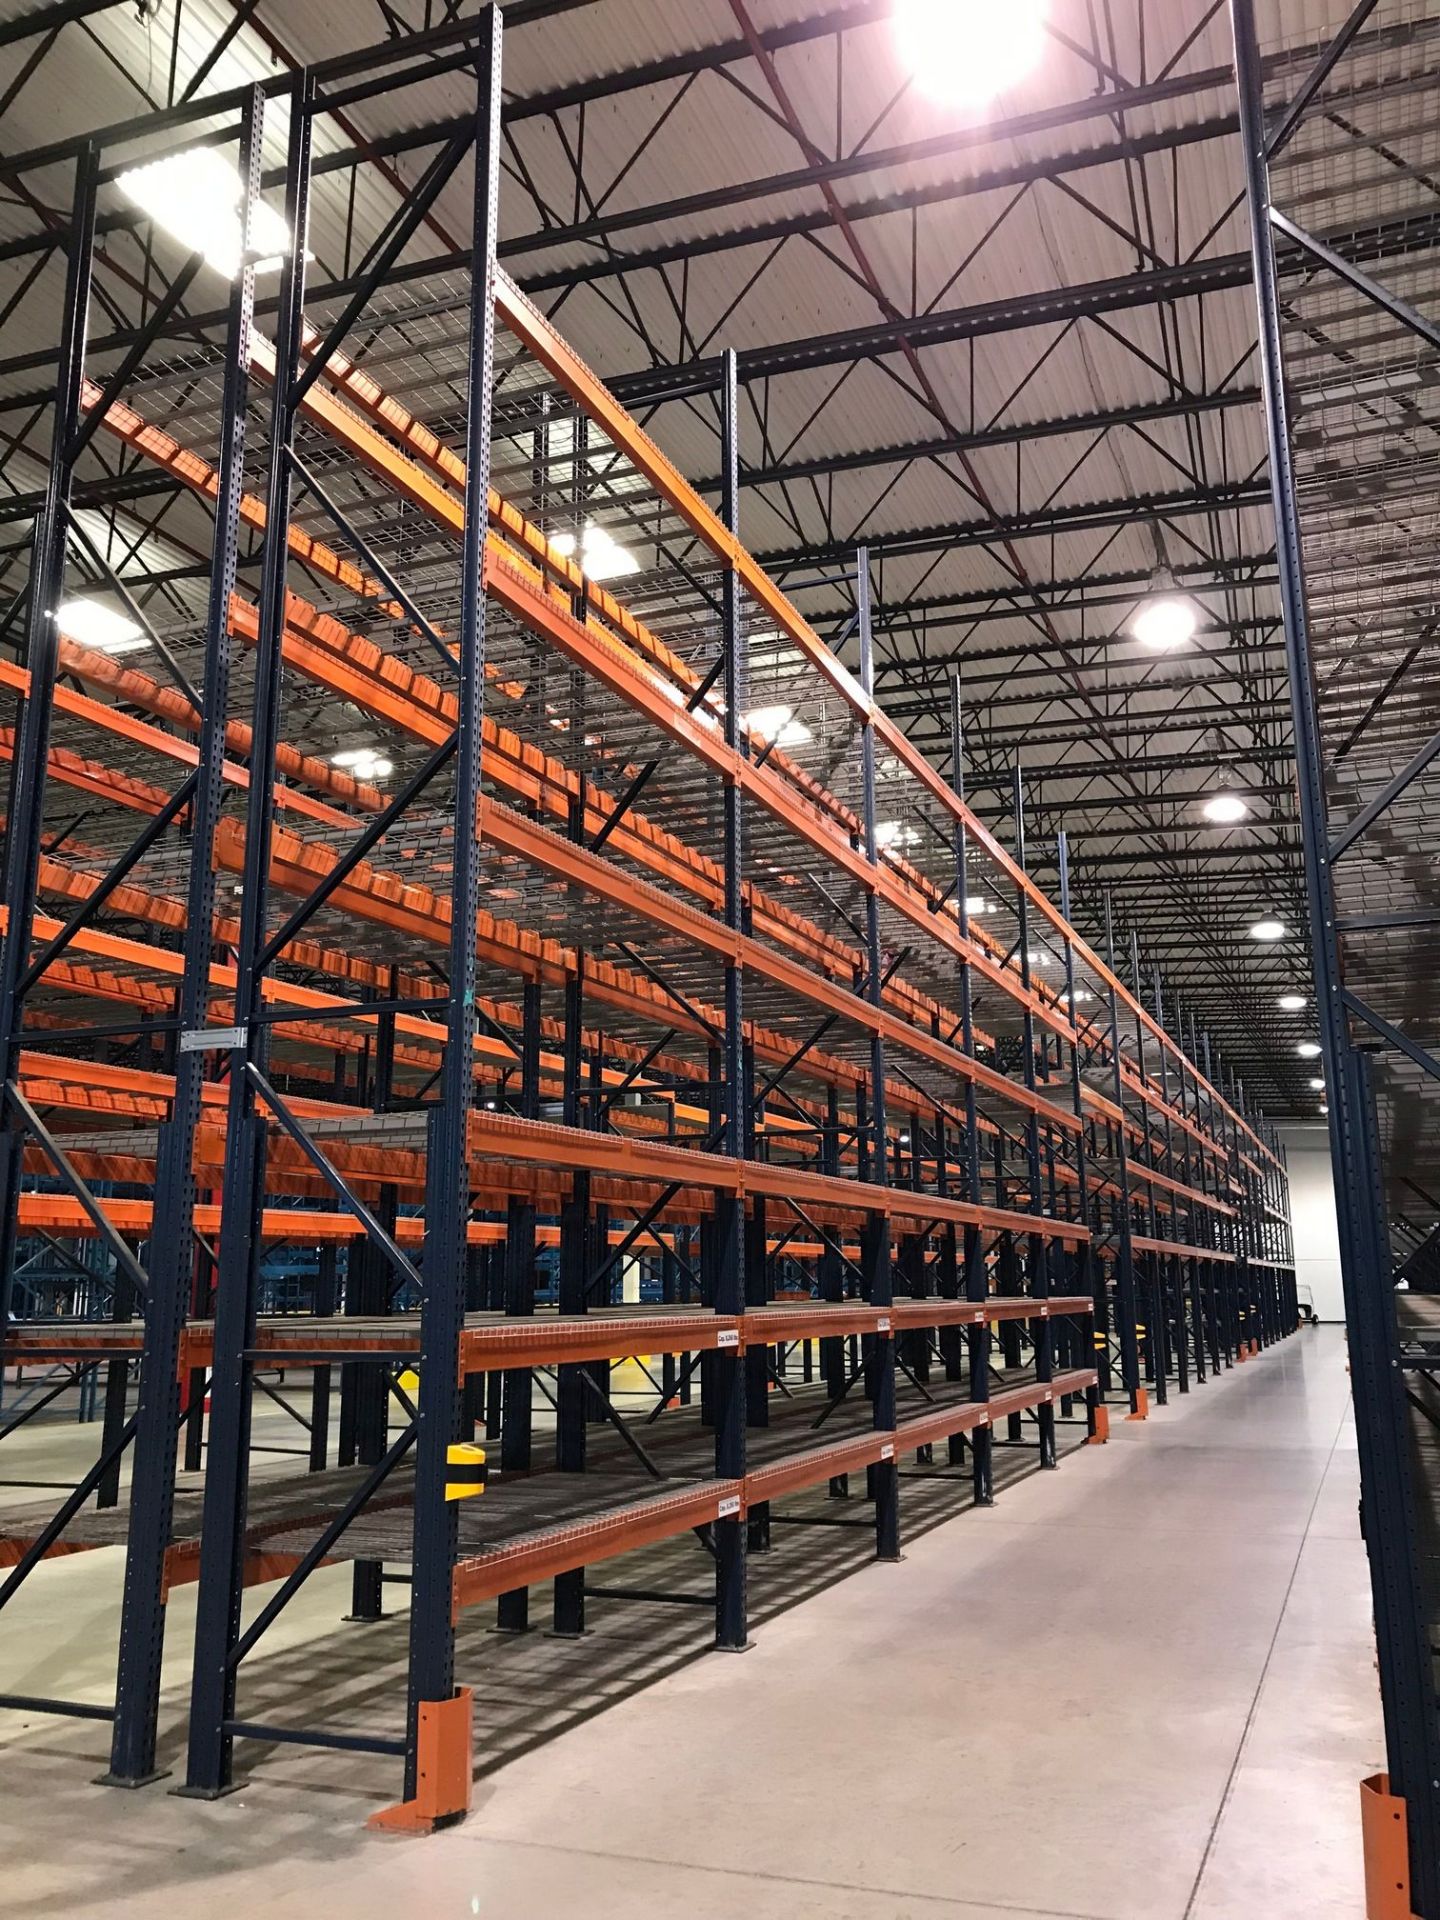 SECTIONS 60" X 108" X 288" TEARDROP TYPE ADJUSTABLE BEAM PALLET RACK WITH WIRE DECKING, 6" HIGH - Image 13 of 14